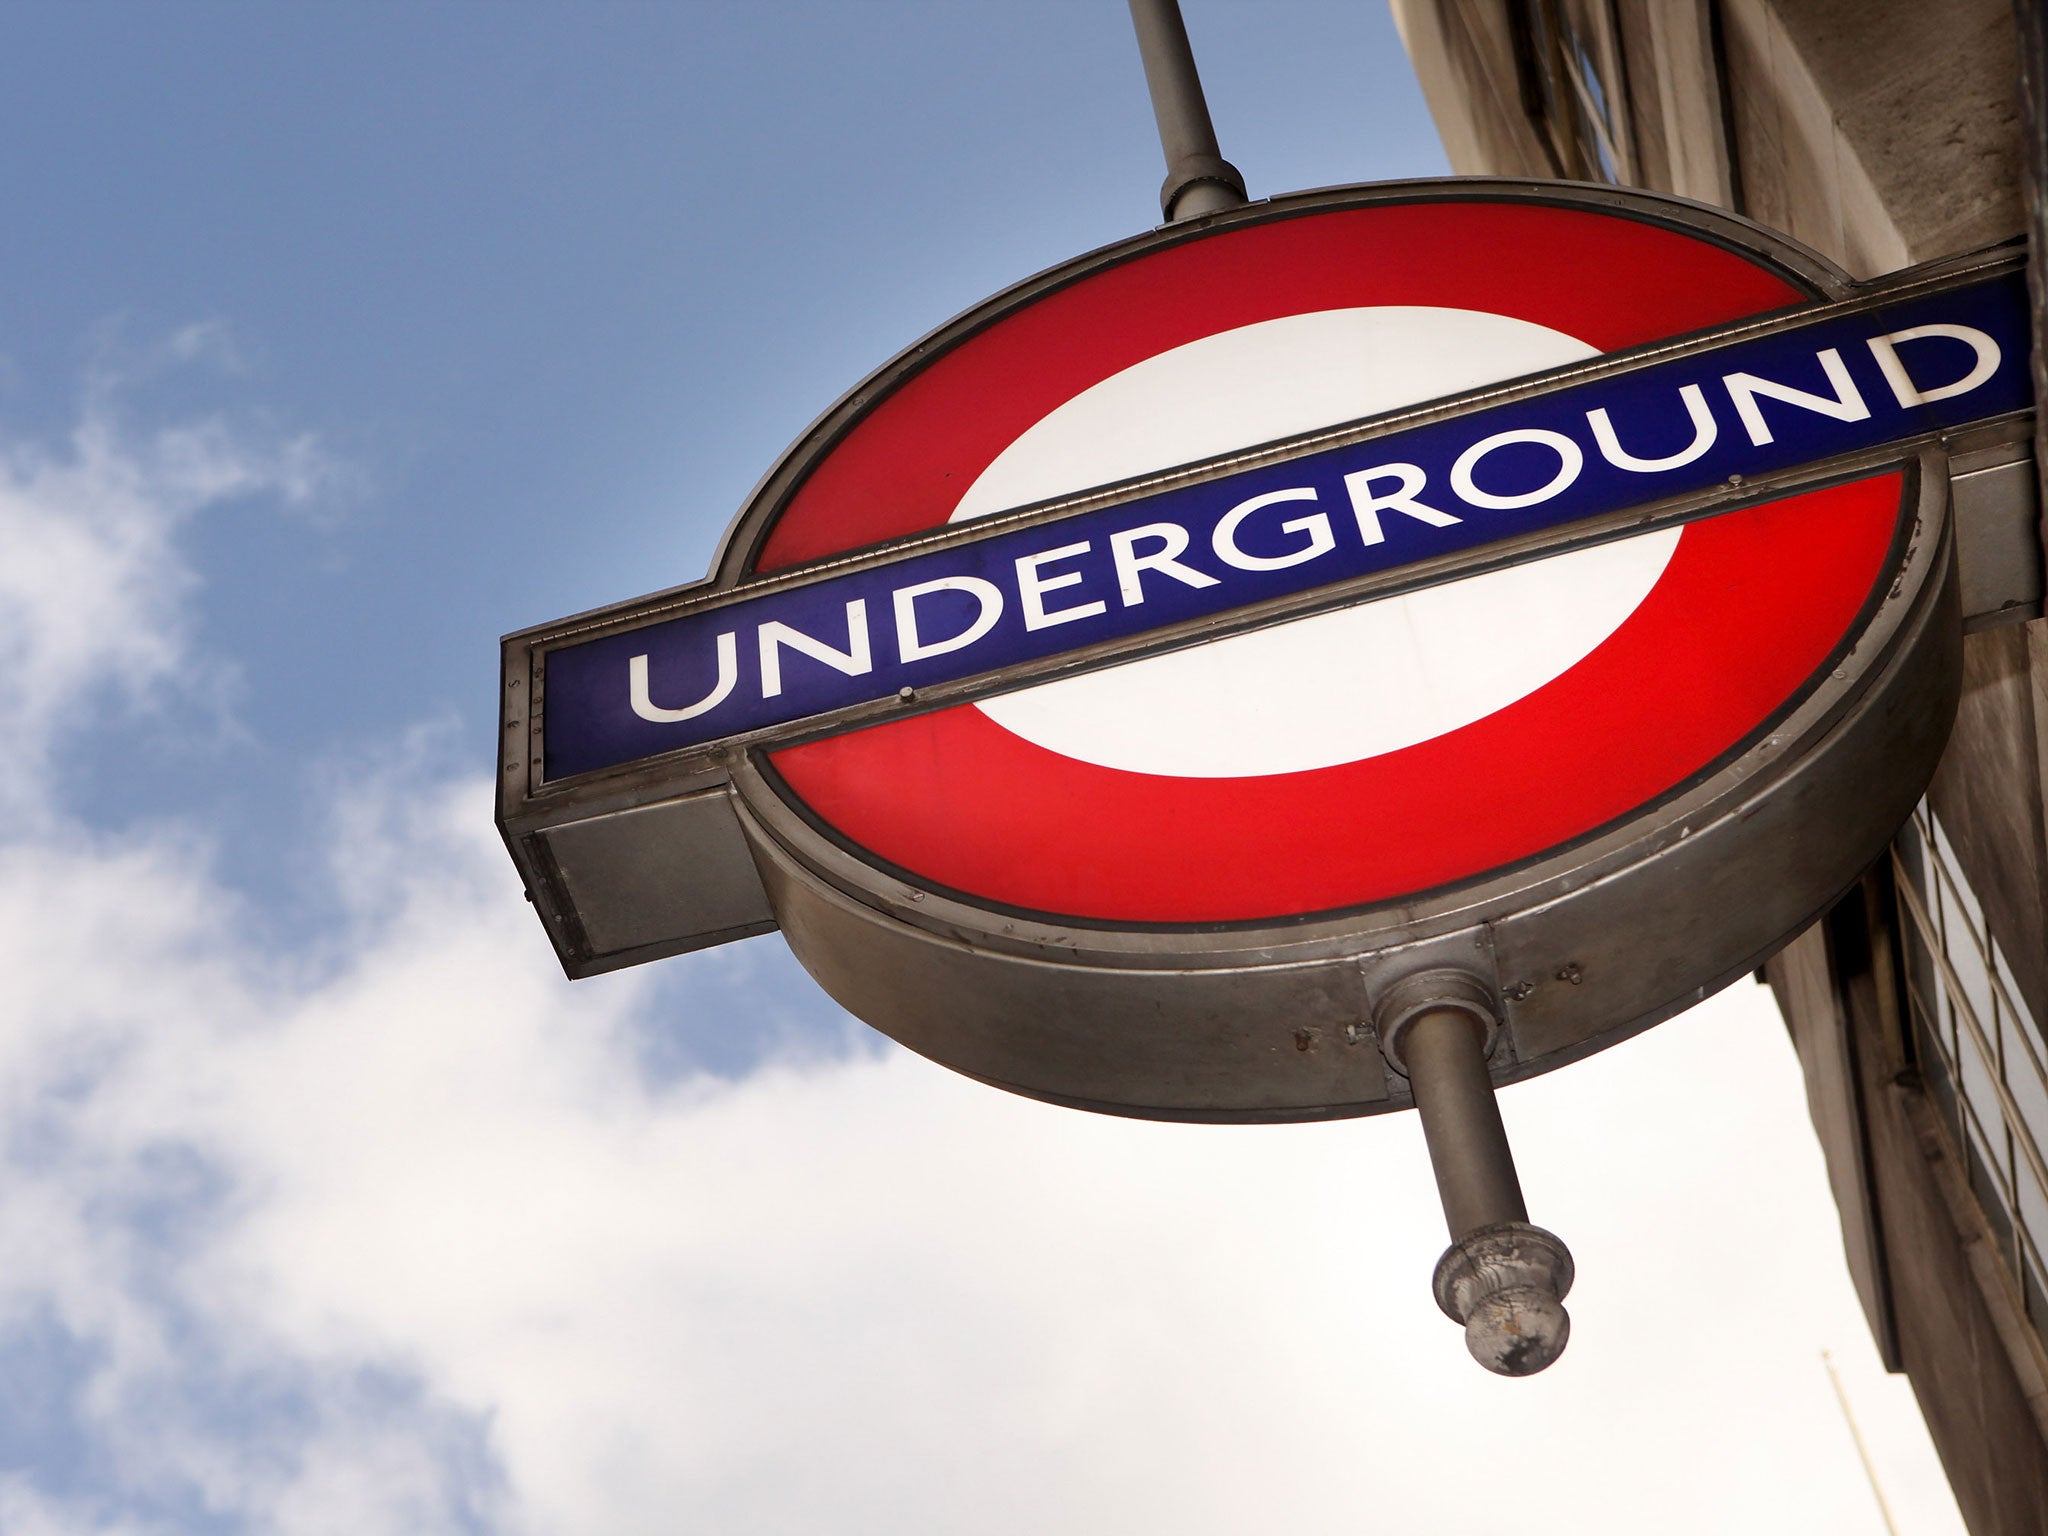 London Underground workers are launching a 24-hour strike